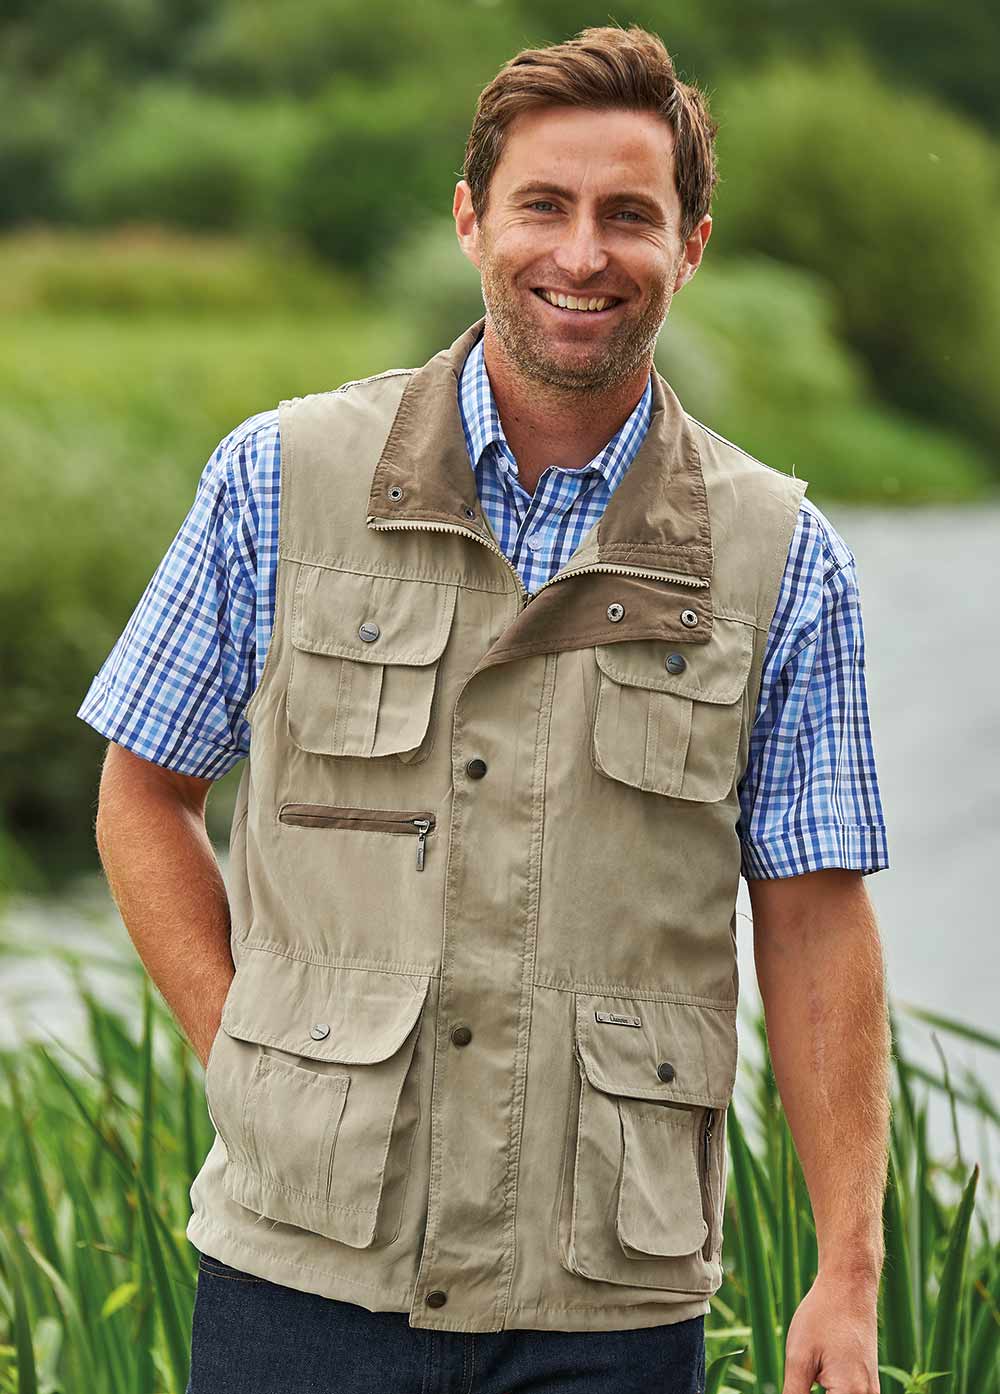 Mens Camouflage Fishing Vest With Multi Pocket Large Mens